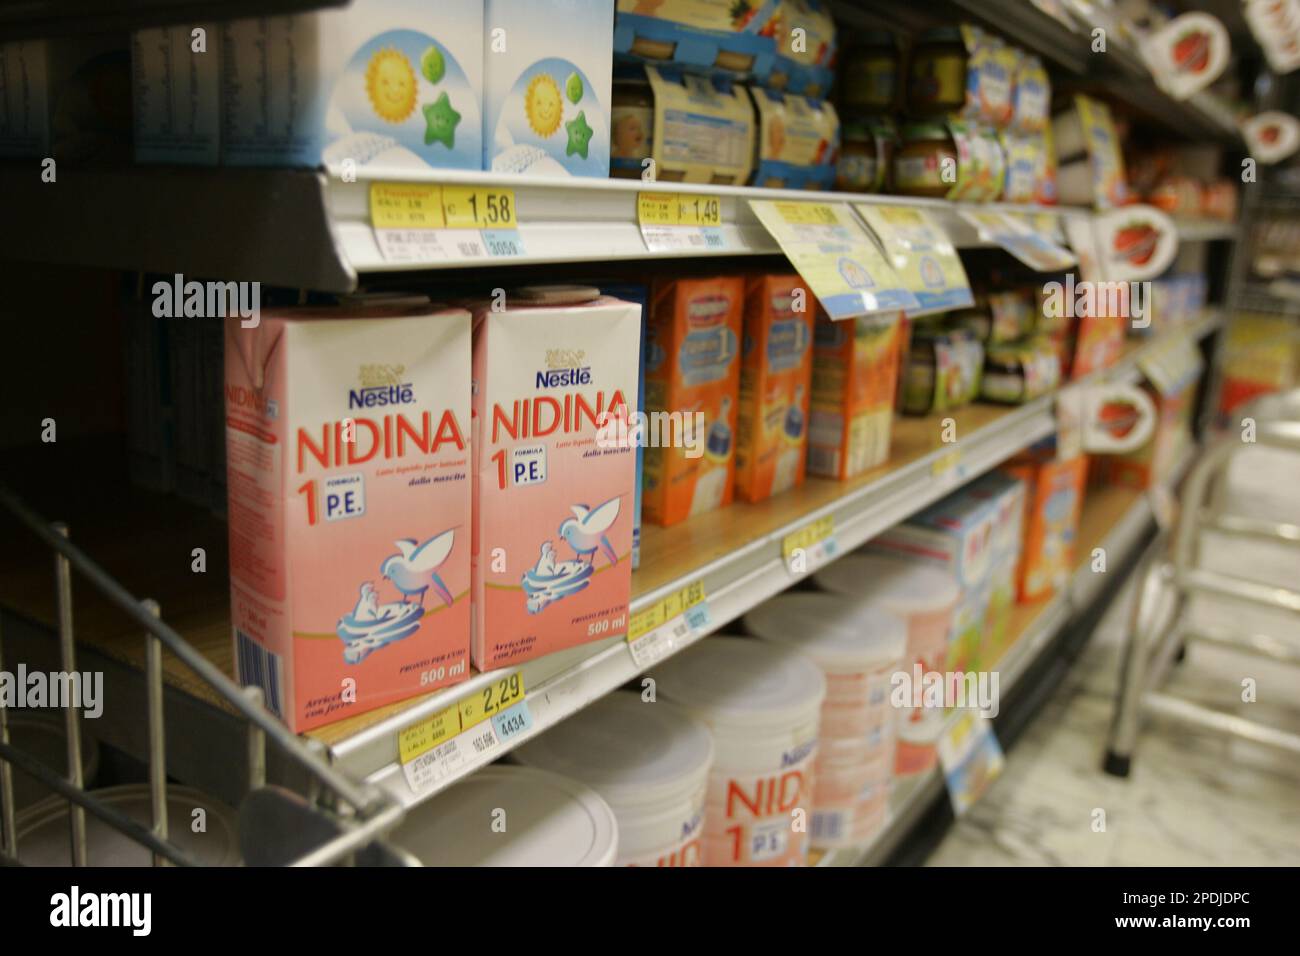 Baby milk on display at a supermarket in Milan, Italy, Tuesday, Nov. 22,  2005. Authorities in Italy have ordered the confiscation of about 30 million  liters (8 million gallons) of baby milk